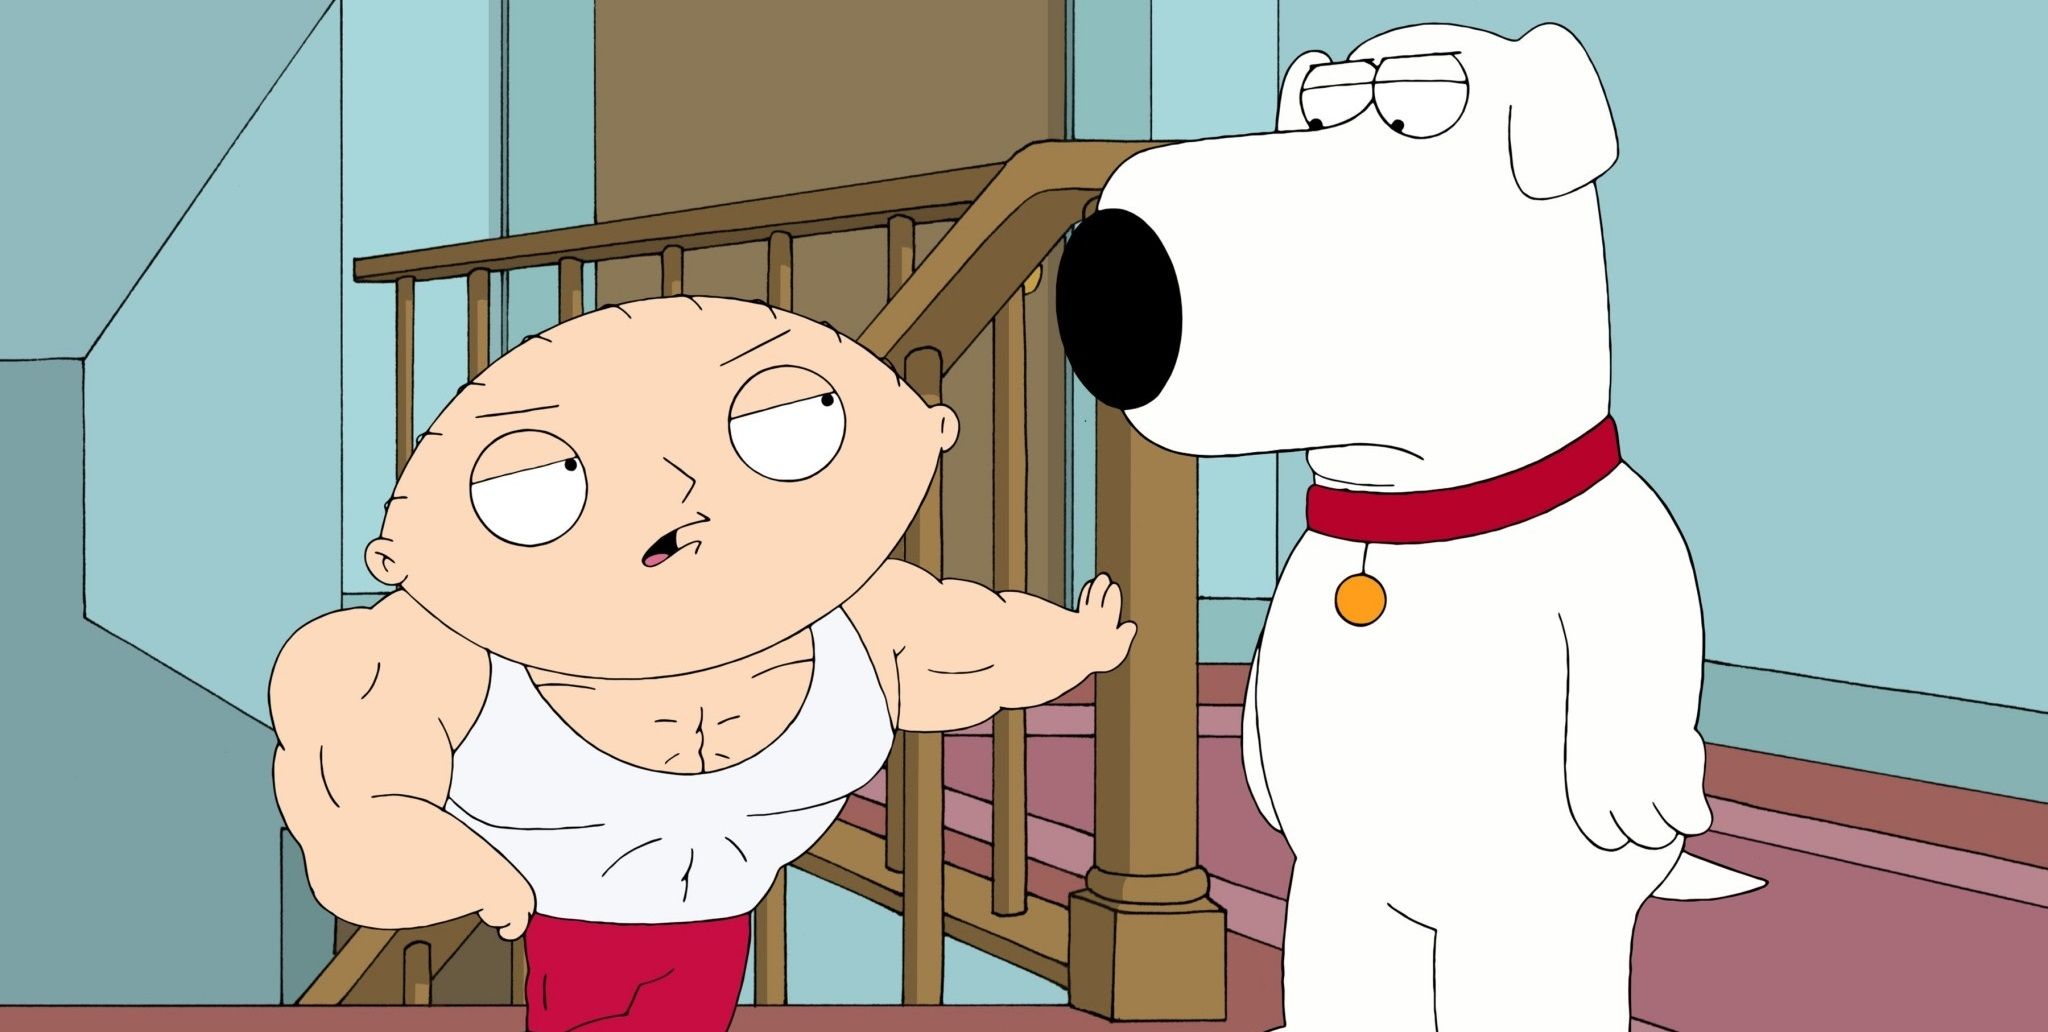 Brian and Stewie are certainly close - probably the closest among all the G...